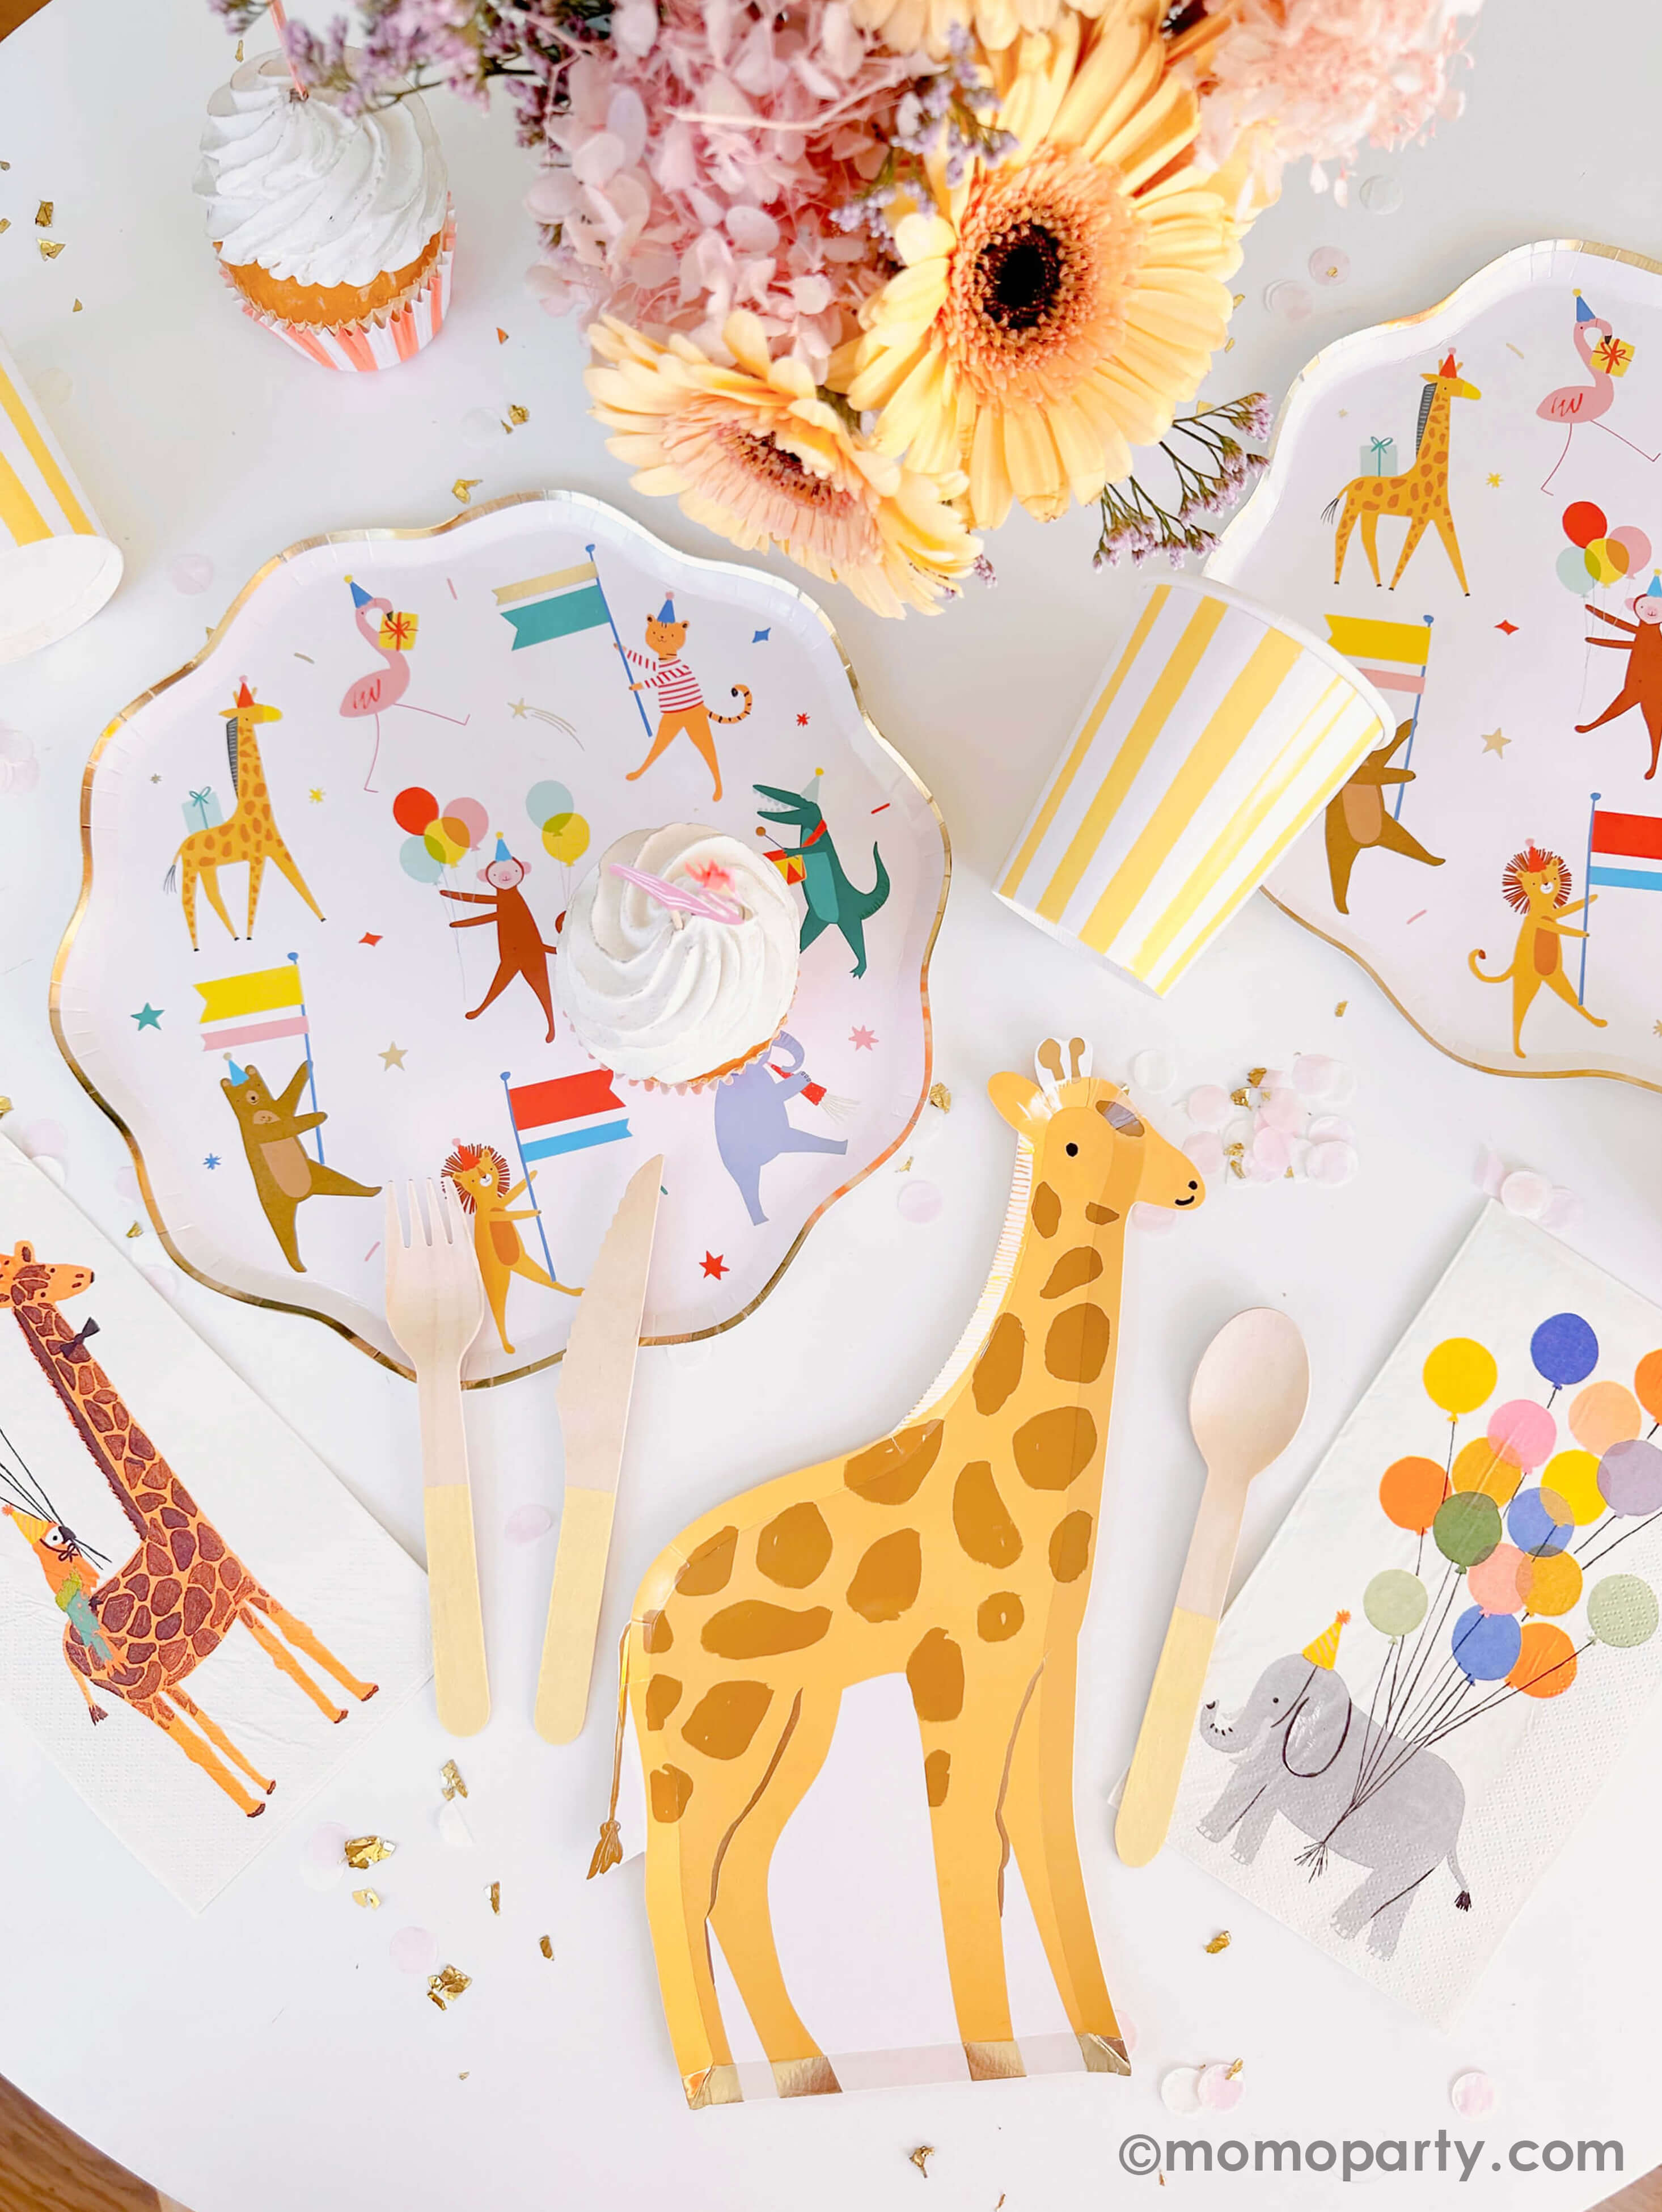 A kid's animal themed tablescape featuring Momo Party's Animal Parade Dinner plate with gold scallop edge and cute animal illustration designs, a giraffe shaped plate for cakes by Meri Meri, and Rifle Paper Co's party animal guest napkins with a cute illustration of an elephant with a party hat and bunch of festive balloons, along with light yellow striped cups and wooden utensil, it makes a great party inspiration for kid's animal, safari, carnival themed birthday party.